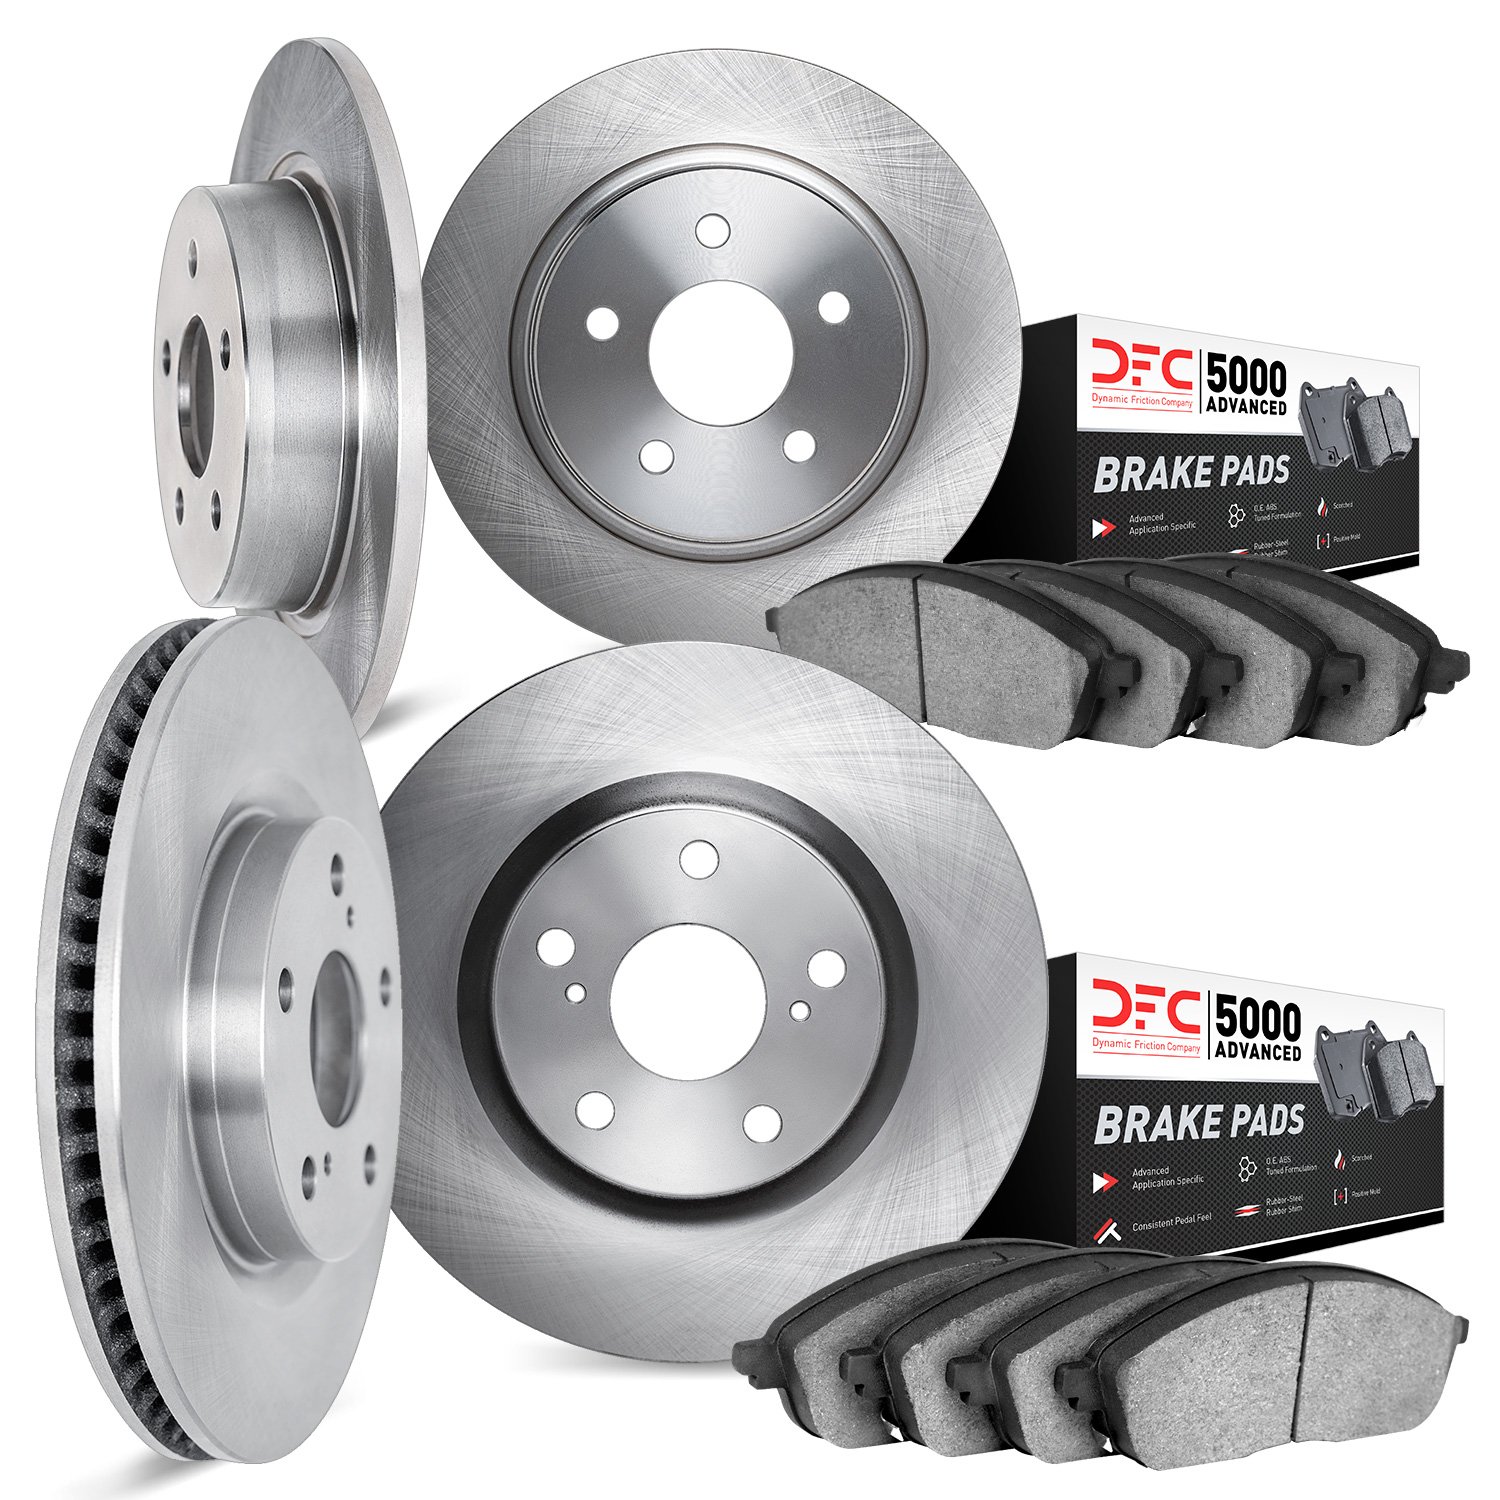 6504-54035 Brake Rotors w/5000 Advanced Brake Pads Kit, 2004-2013 Volvo, Position: Front and Rear